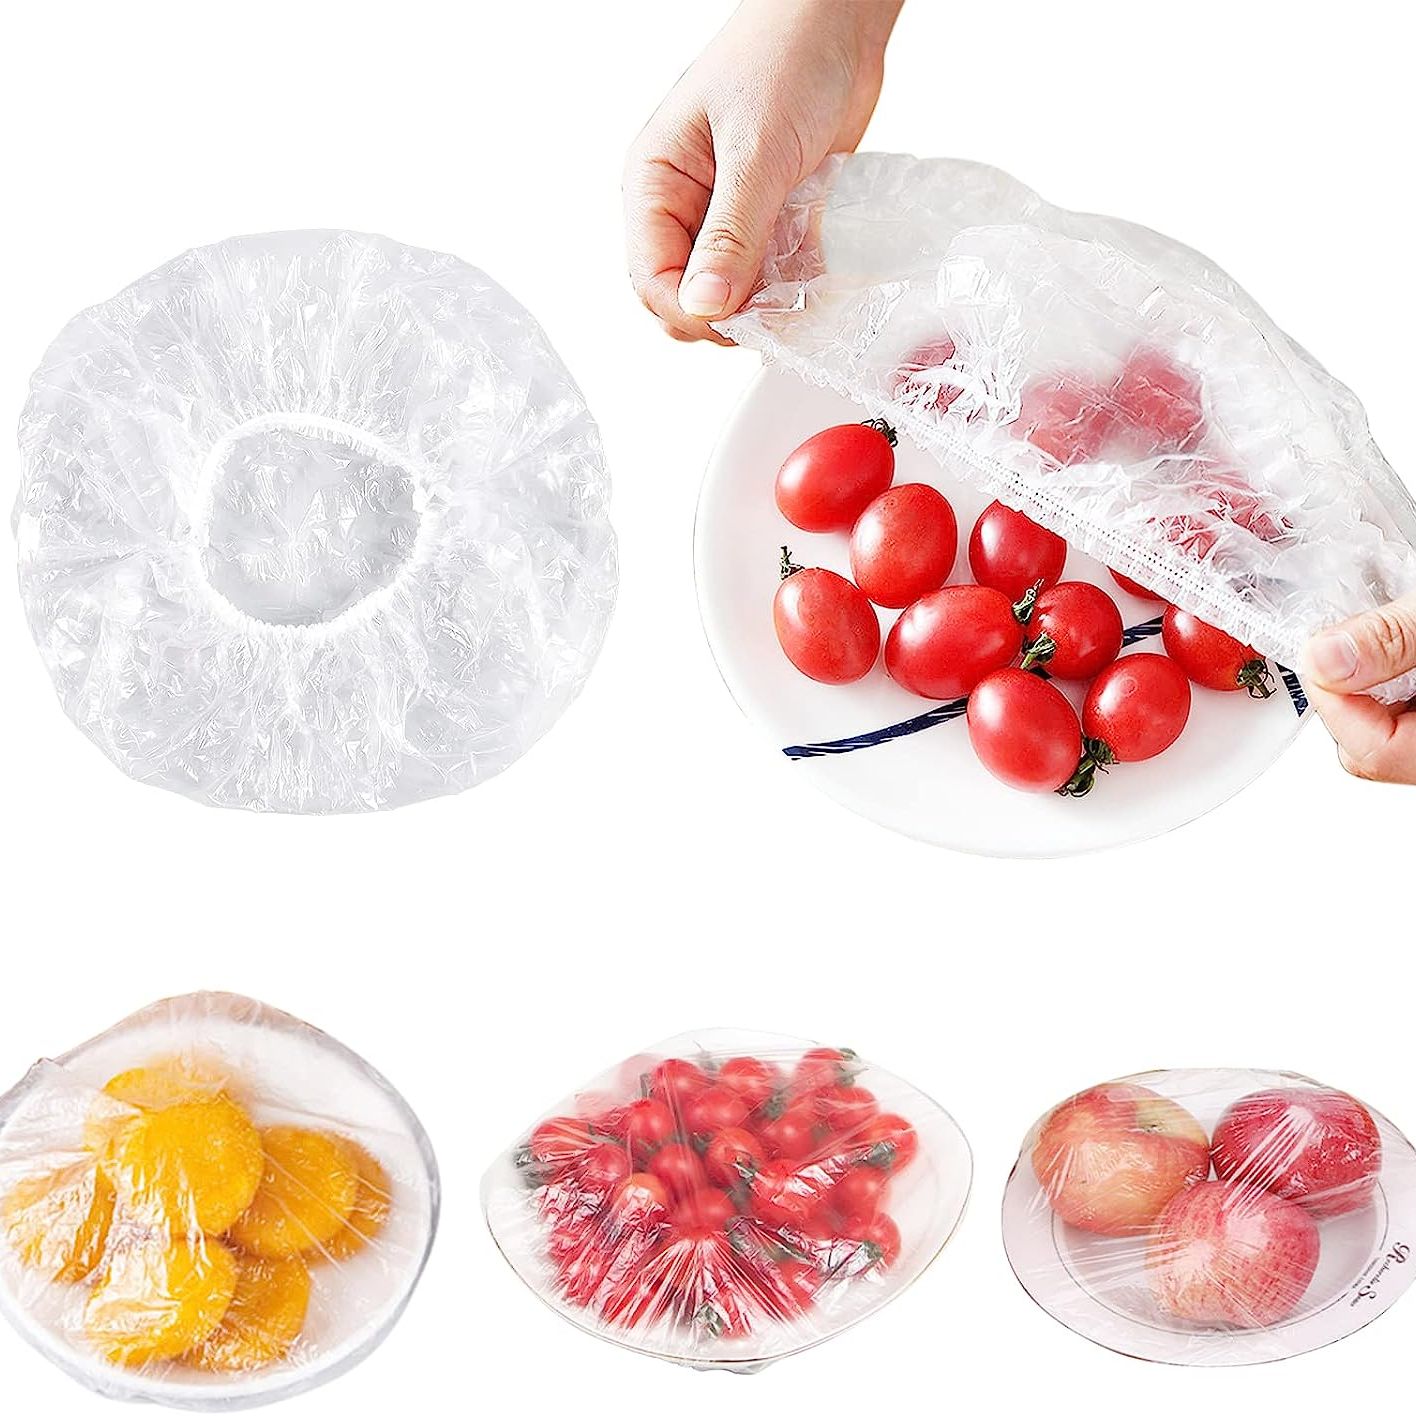 100PCS Reusable Elastic Food Plastic Wrap, Stretchable Food Storage Covers  with Elastic Edging, Plate Serving Covers for Family Leftover and Outdoor